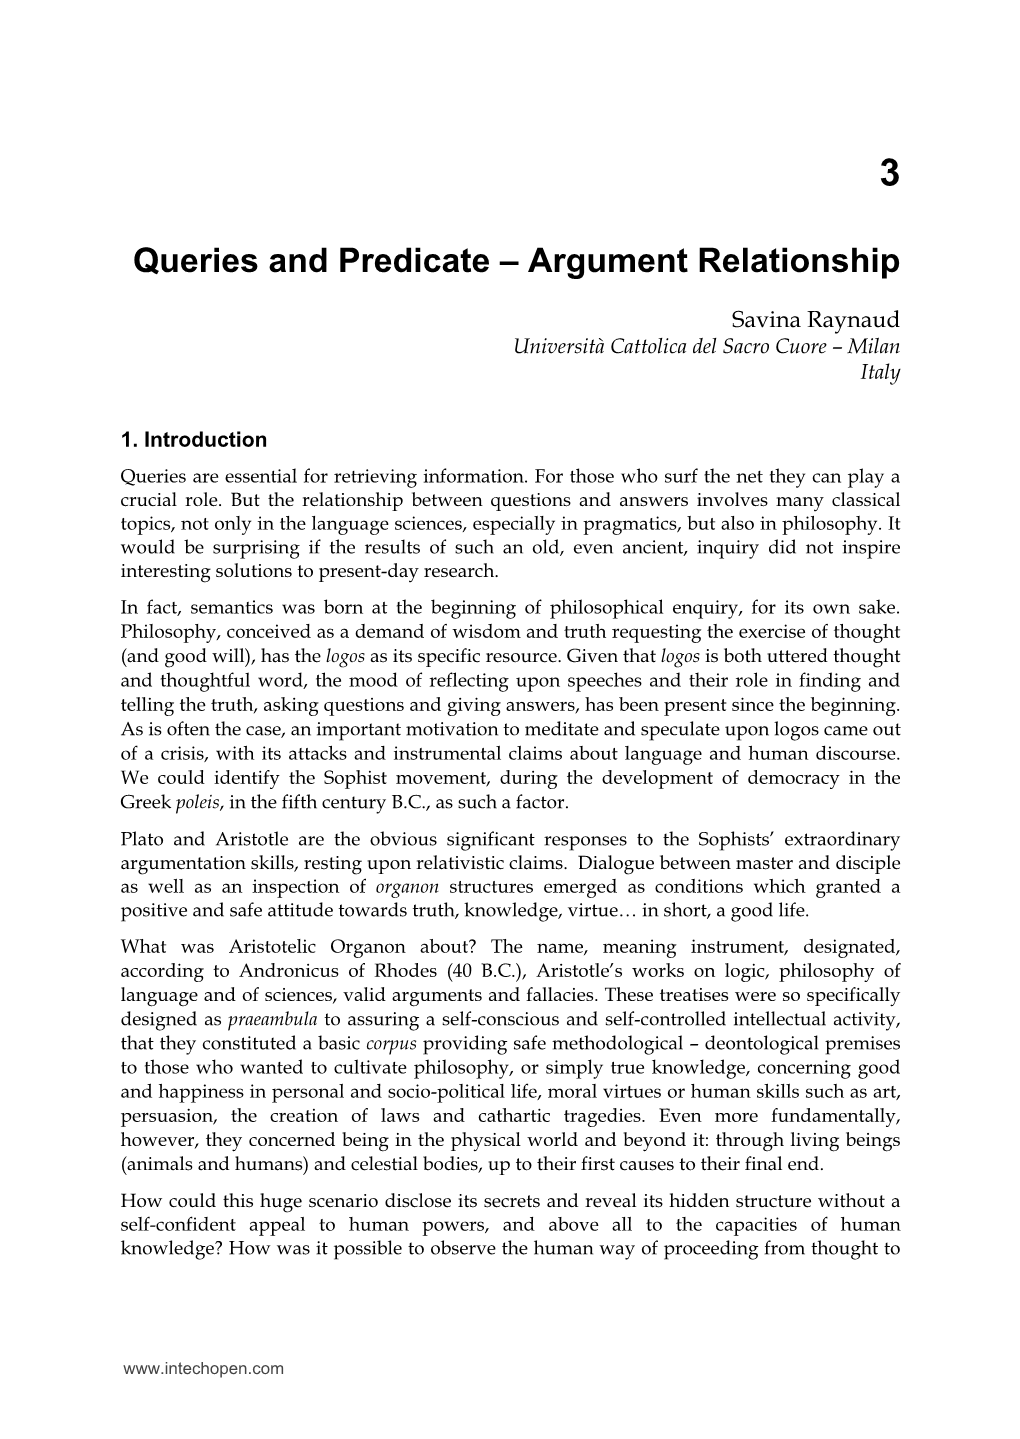 Queries and Predicate – Argument Relationship